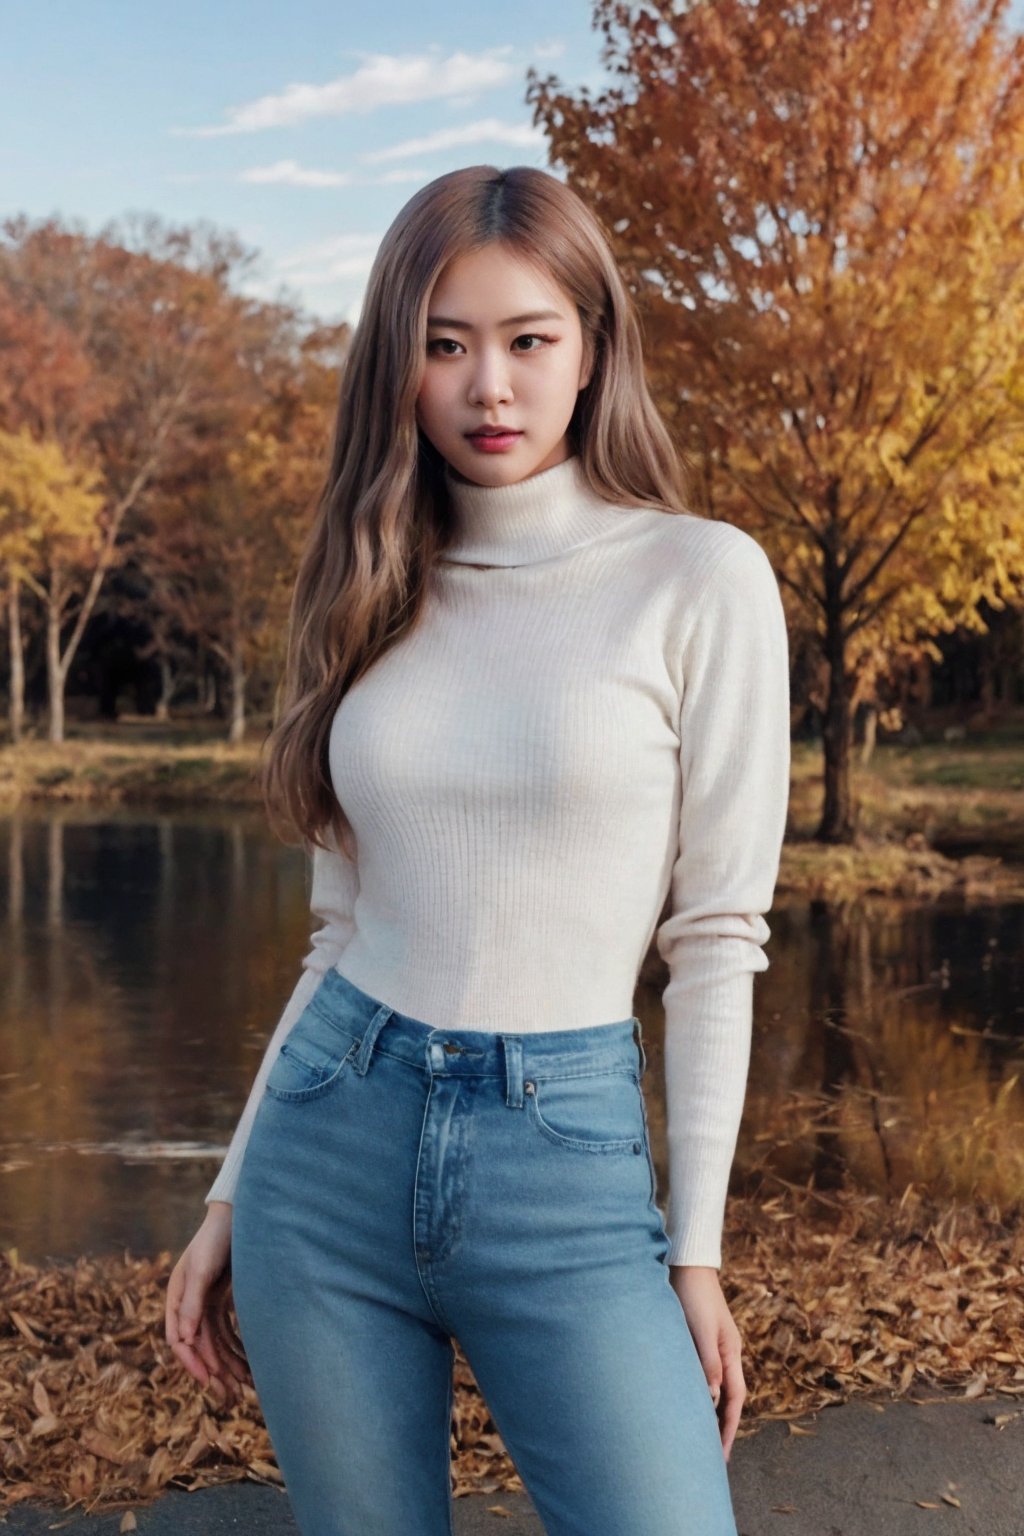 ((Generate hyper realistic image of captivating scene featuring a stunning 22 years old Korean girl)), with long white hair, semi side view, donning tight blue jeans and a turtle neck sweater, autumn scenery, piercing, brown eyes, photography style , Extremely Realistic,  ,photo r3al,photo of perfecteyes eyes,realistic,leather,Masterpiece